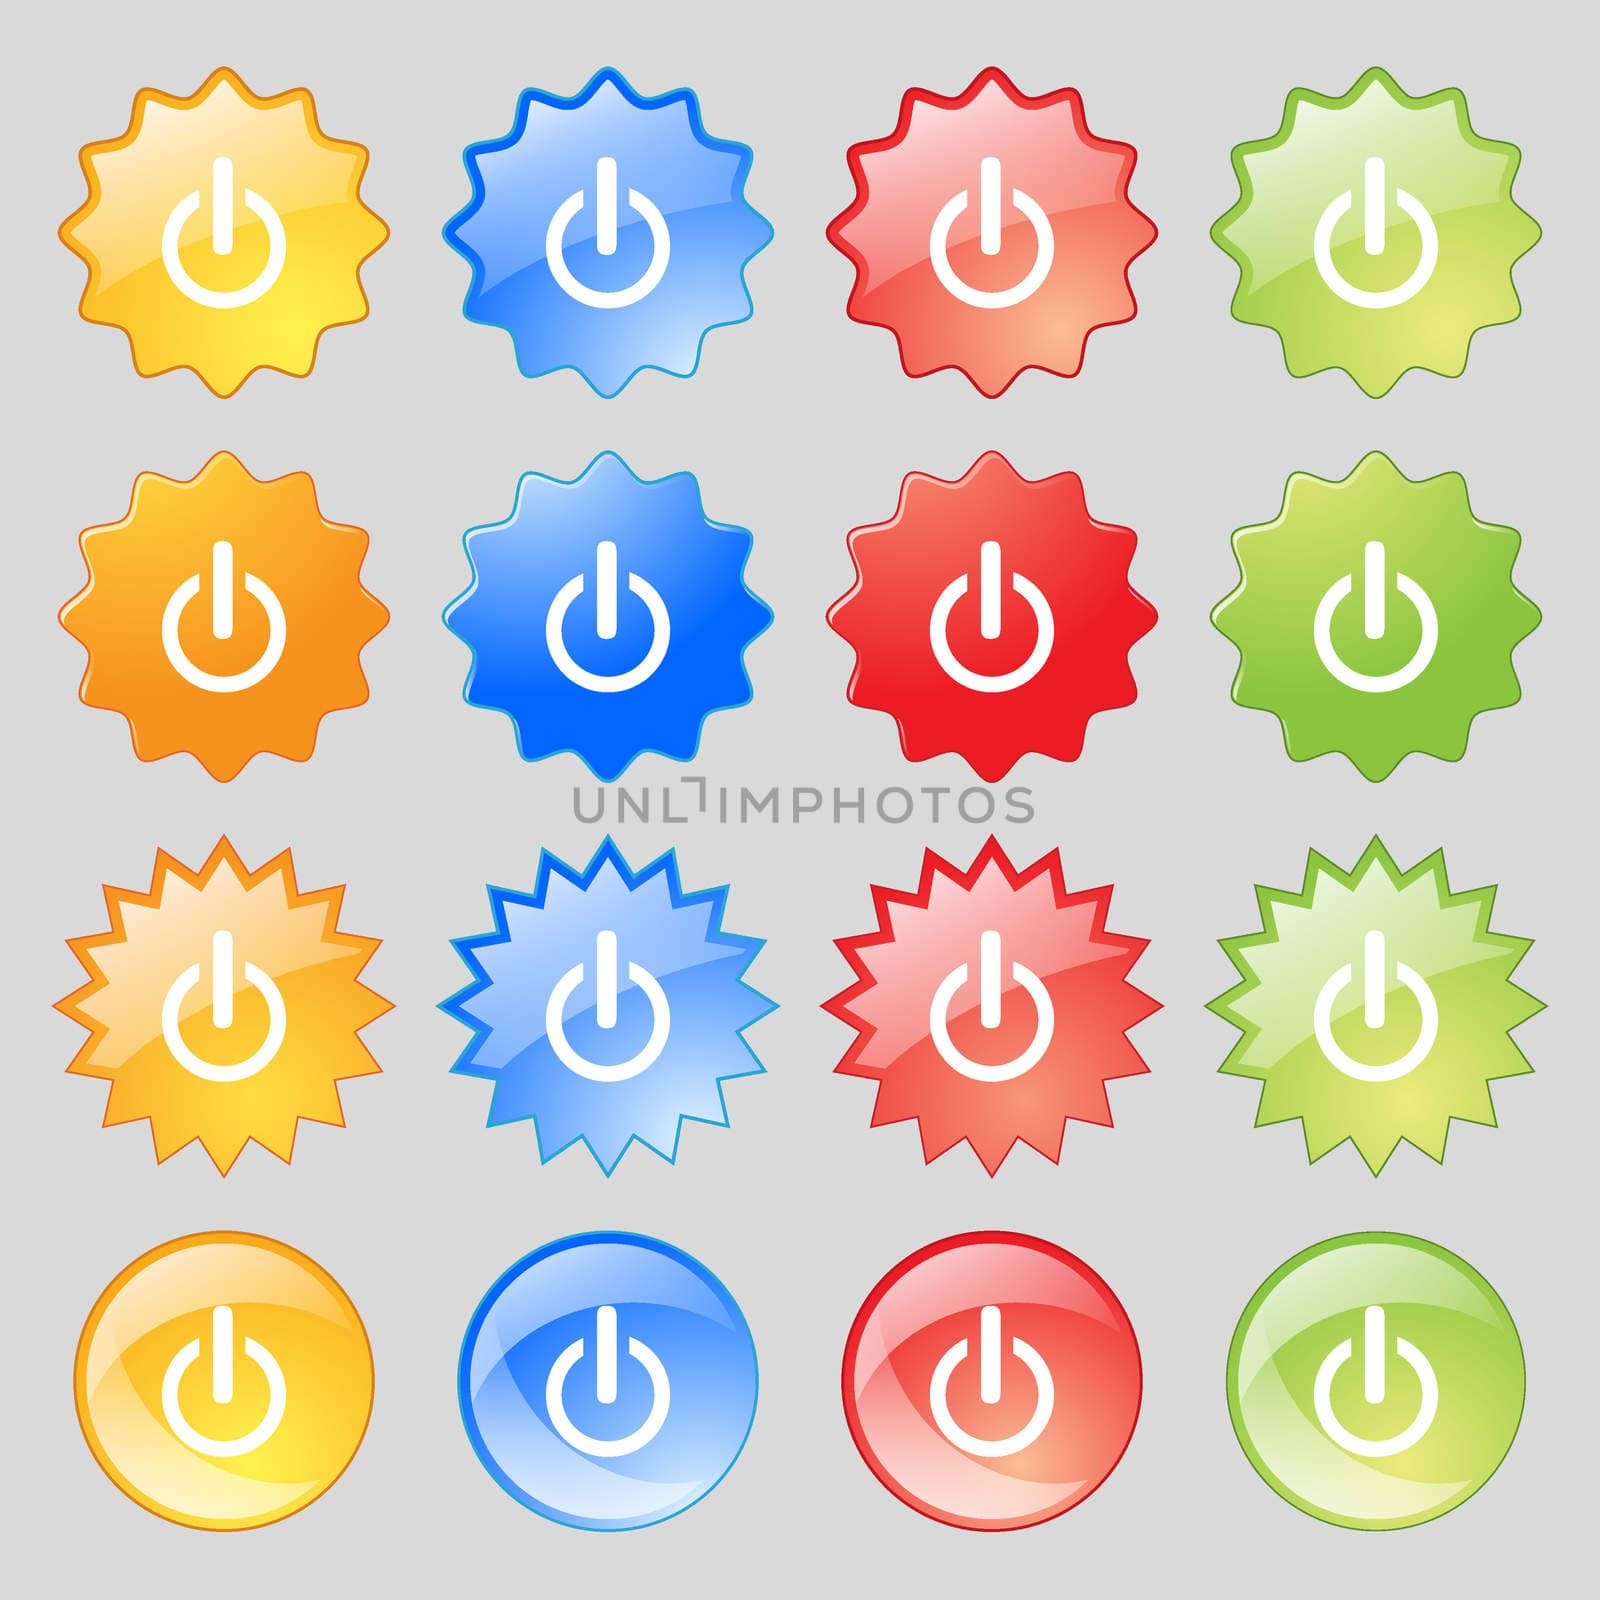 Power sign icon. Switch on symbol. Big set of 16 colorful modern buttons for your design. illustration